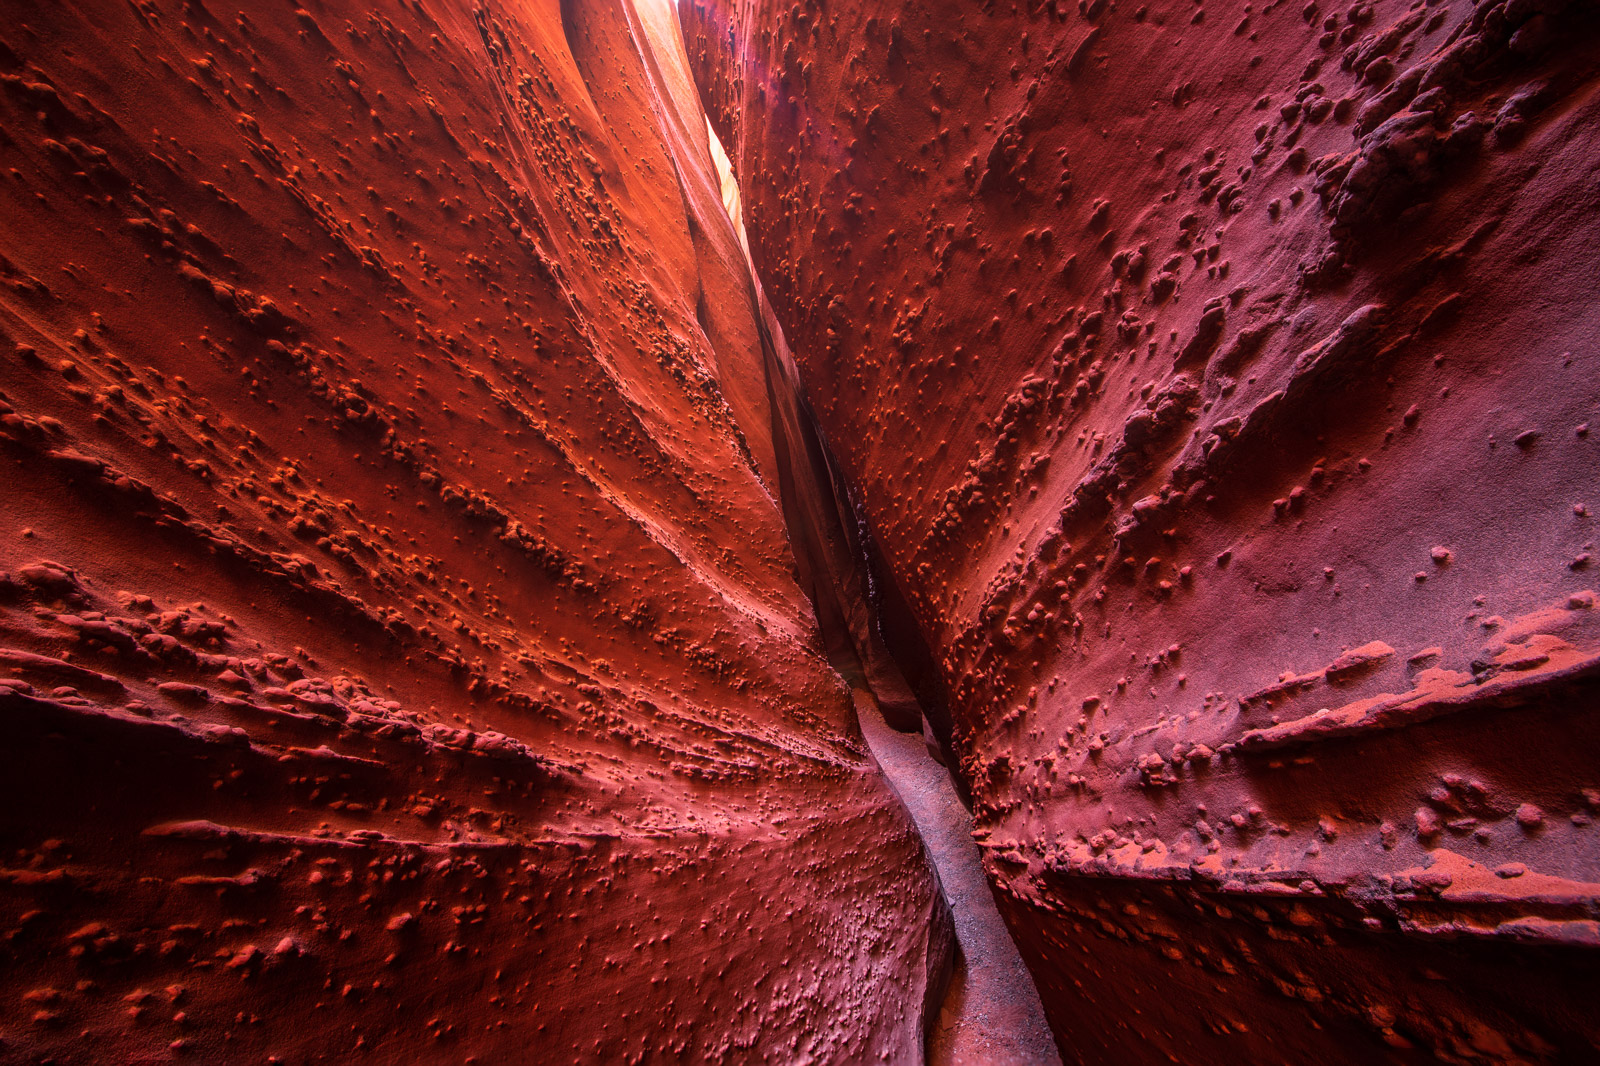 This is Spooky Slot Canyon in Southern Utah, one of the tighest slot canyons in the world.